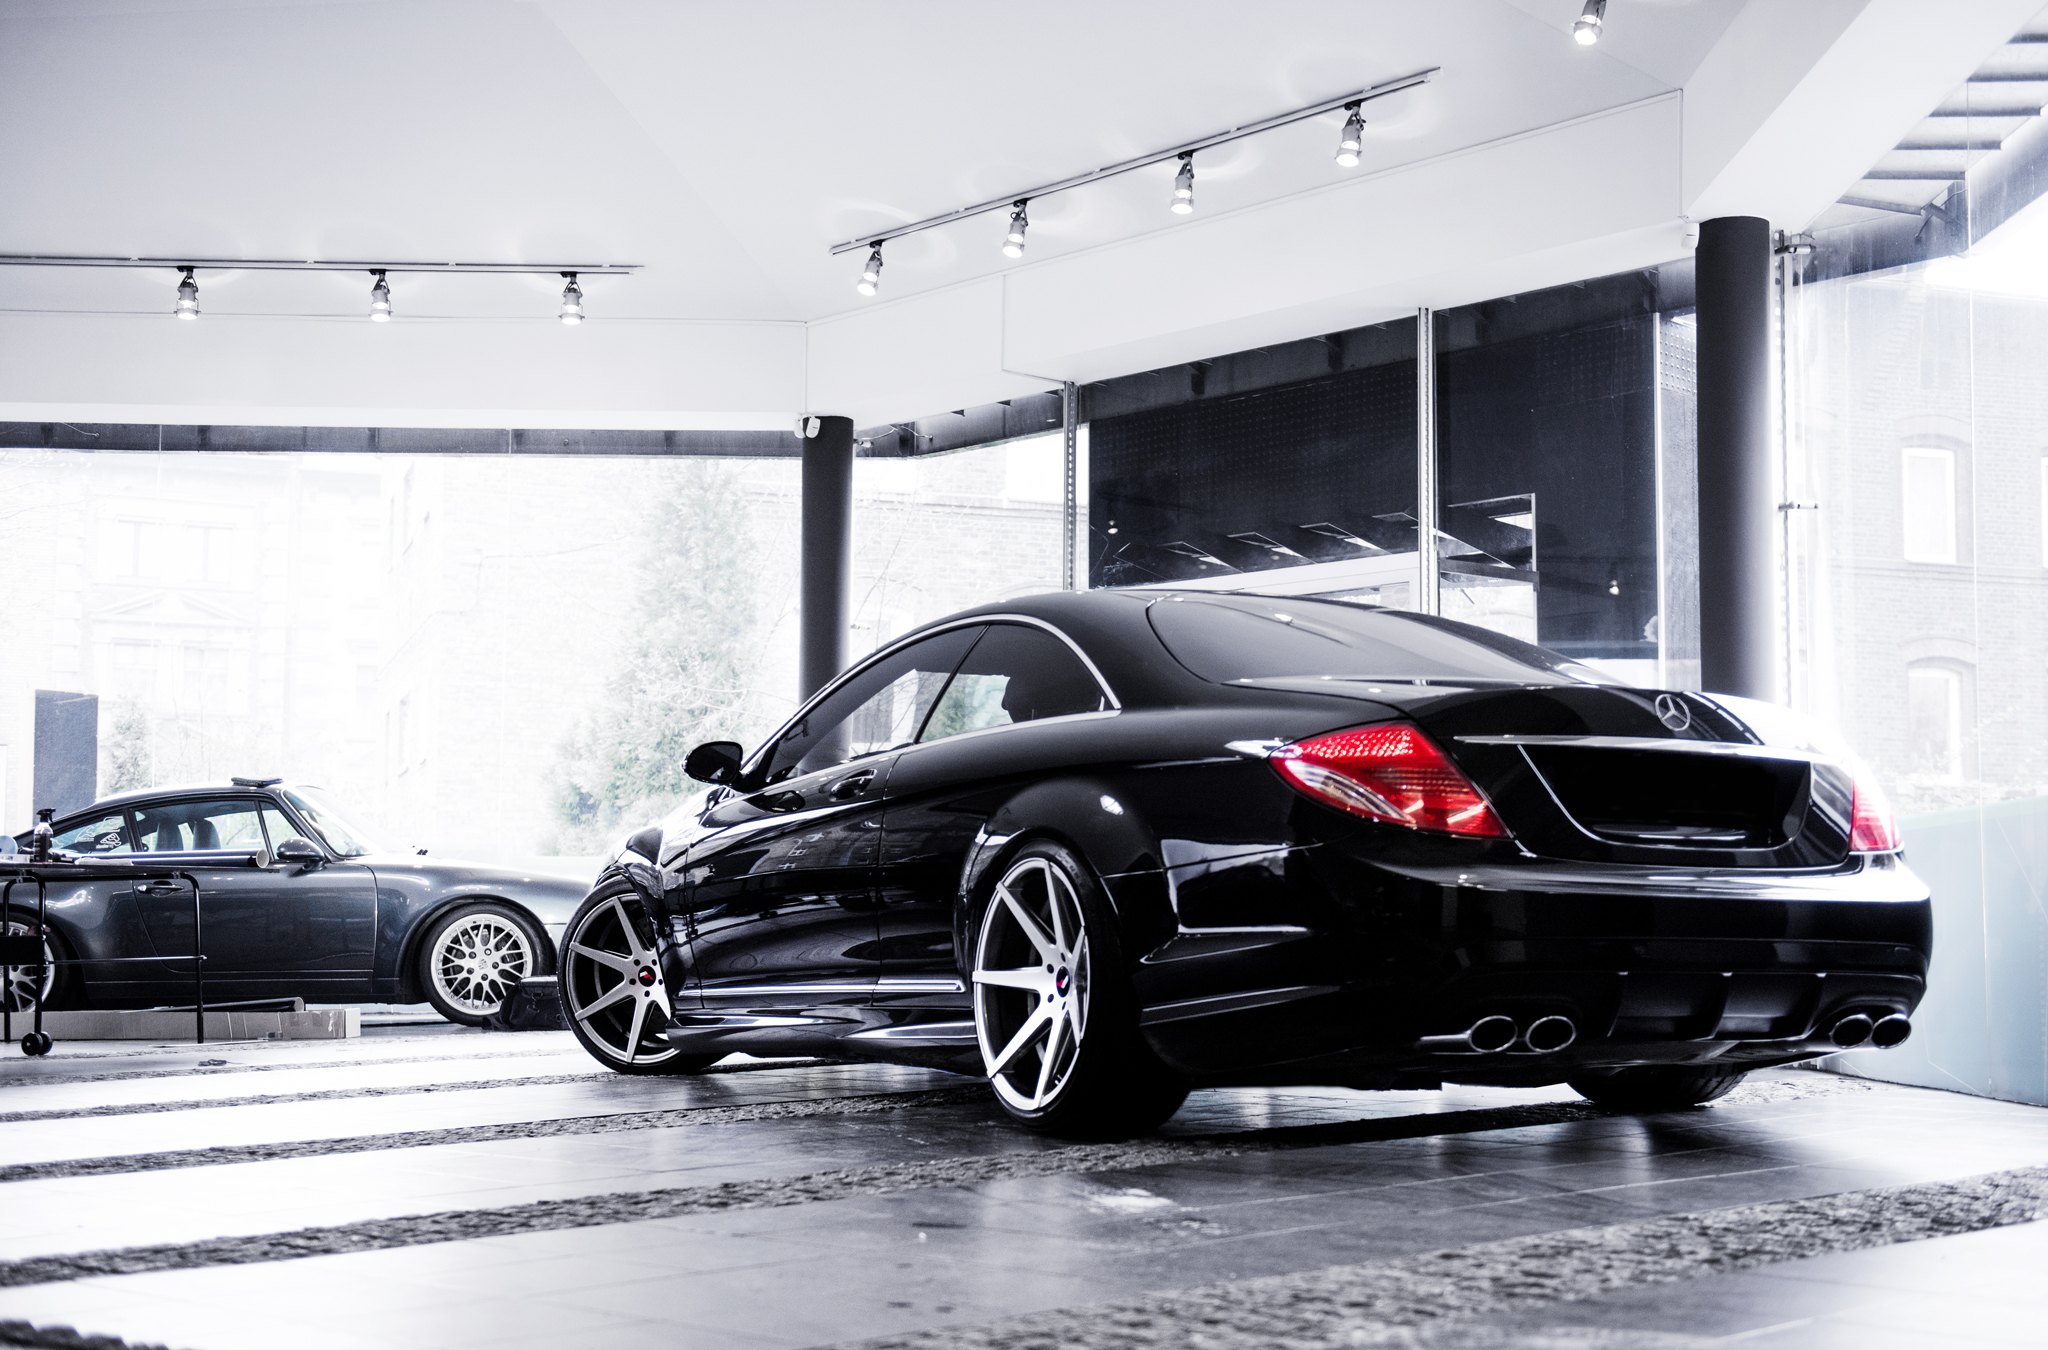 Aftermarket Rear Diffuser on Black Mercedes CL Class - Photo by JR Wheels